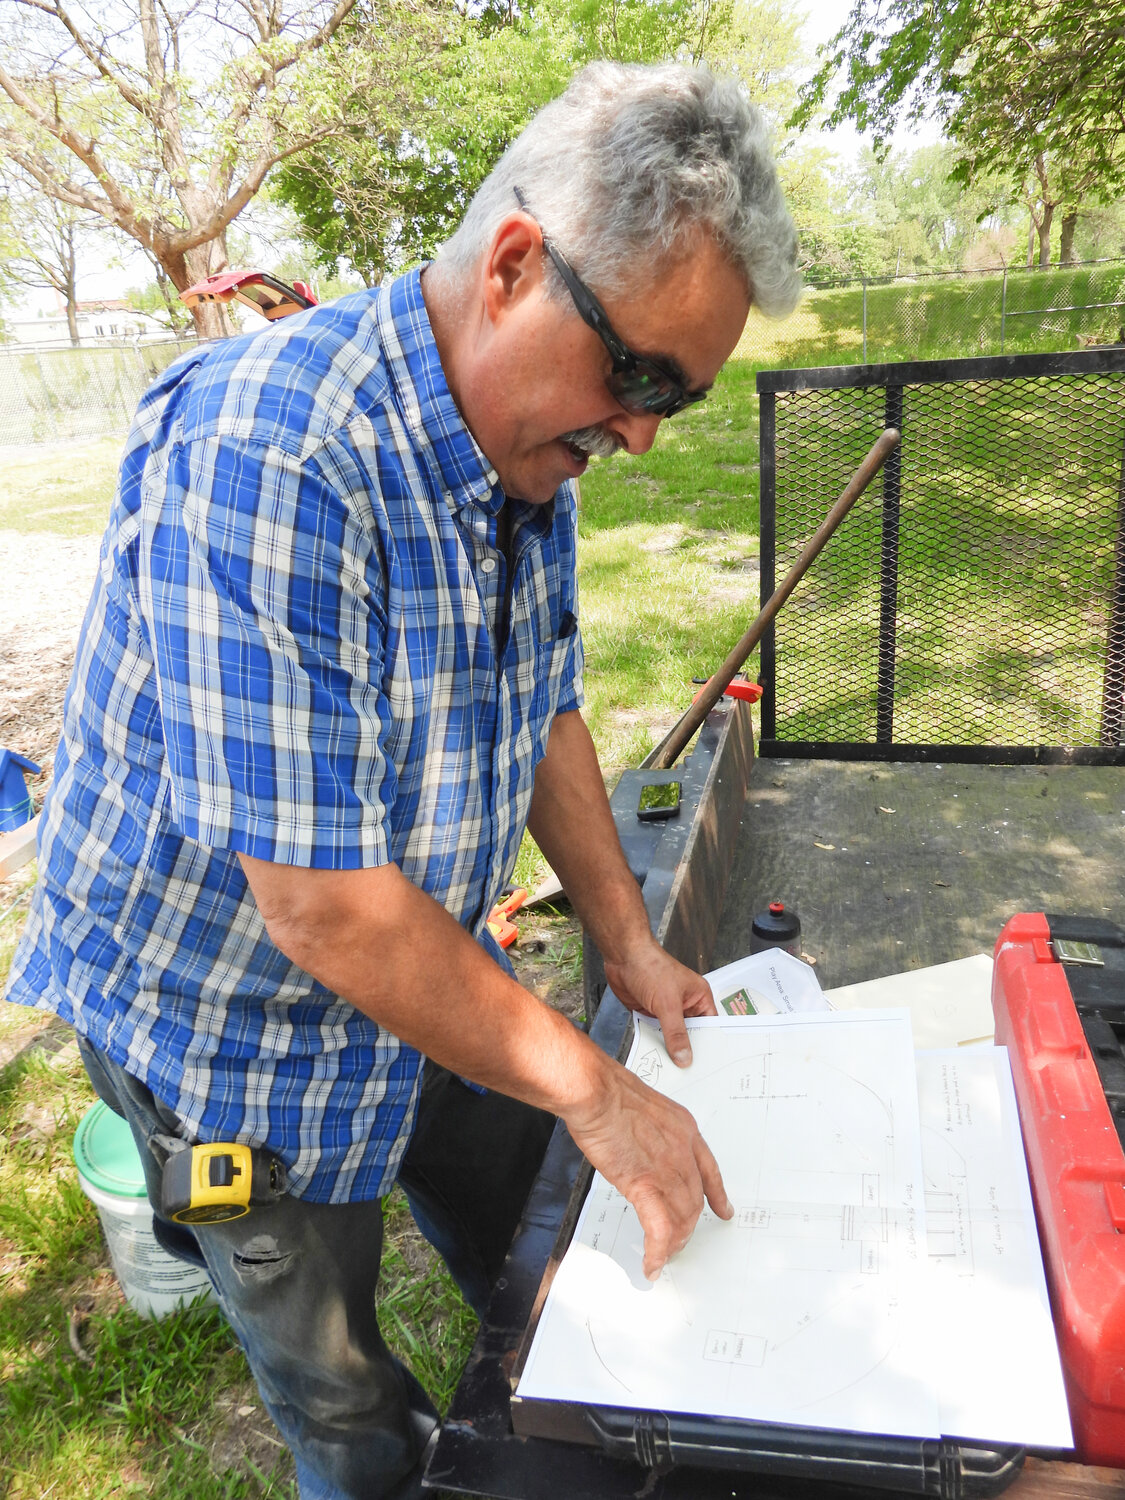 OIC Member and Volunteer Joseph Magliocca looks over some of the plans for the Oneida Dog Park and points out where certain obstacles and structures would go